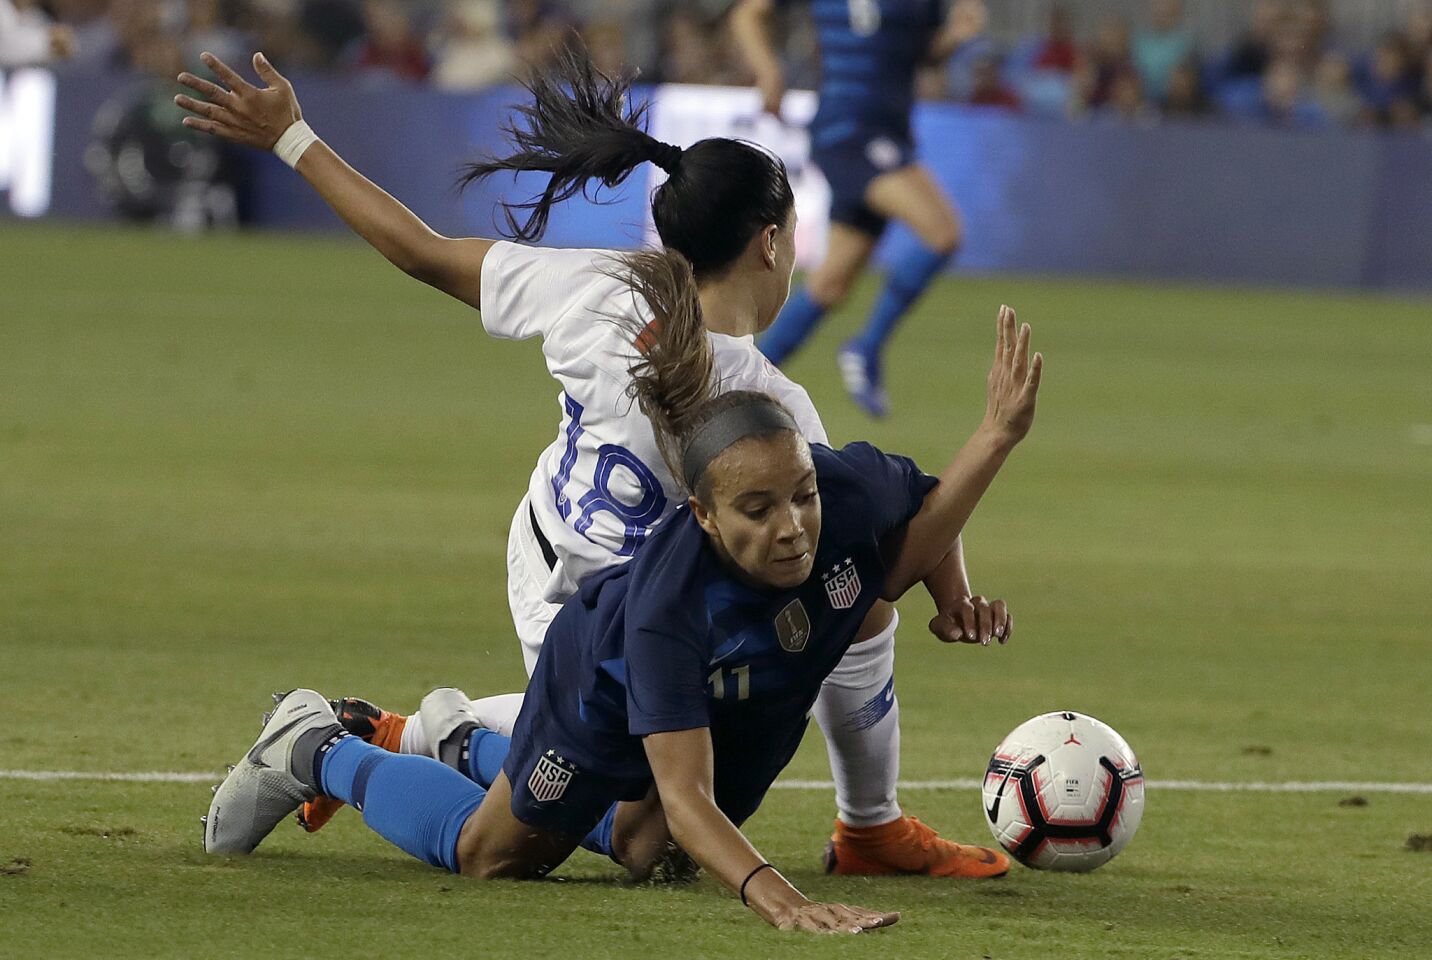 United States' Mallory Pugh, bottom, gets tangled up with Chile's Camila Saez during the first half of an international friendly soccer match in San Jose, Calif., Tuesday, Sept. 4, 2018. (AP Photo/Jeff Chiu)